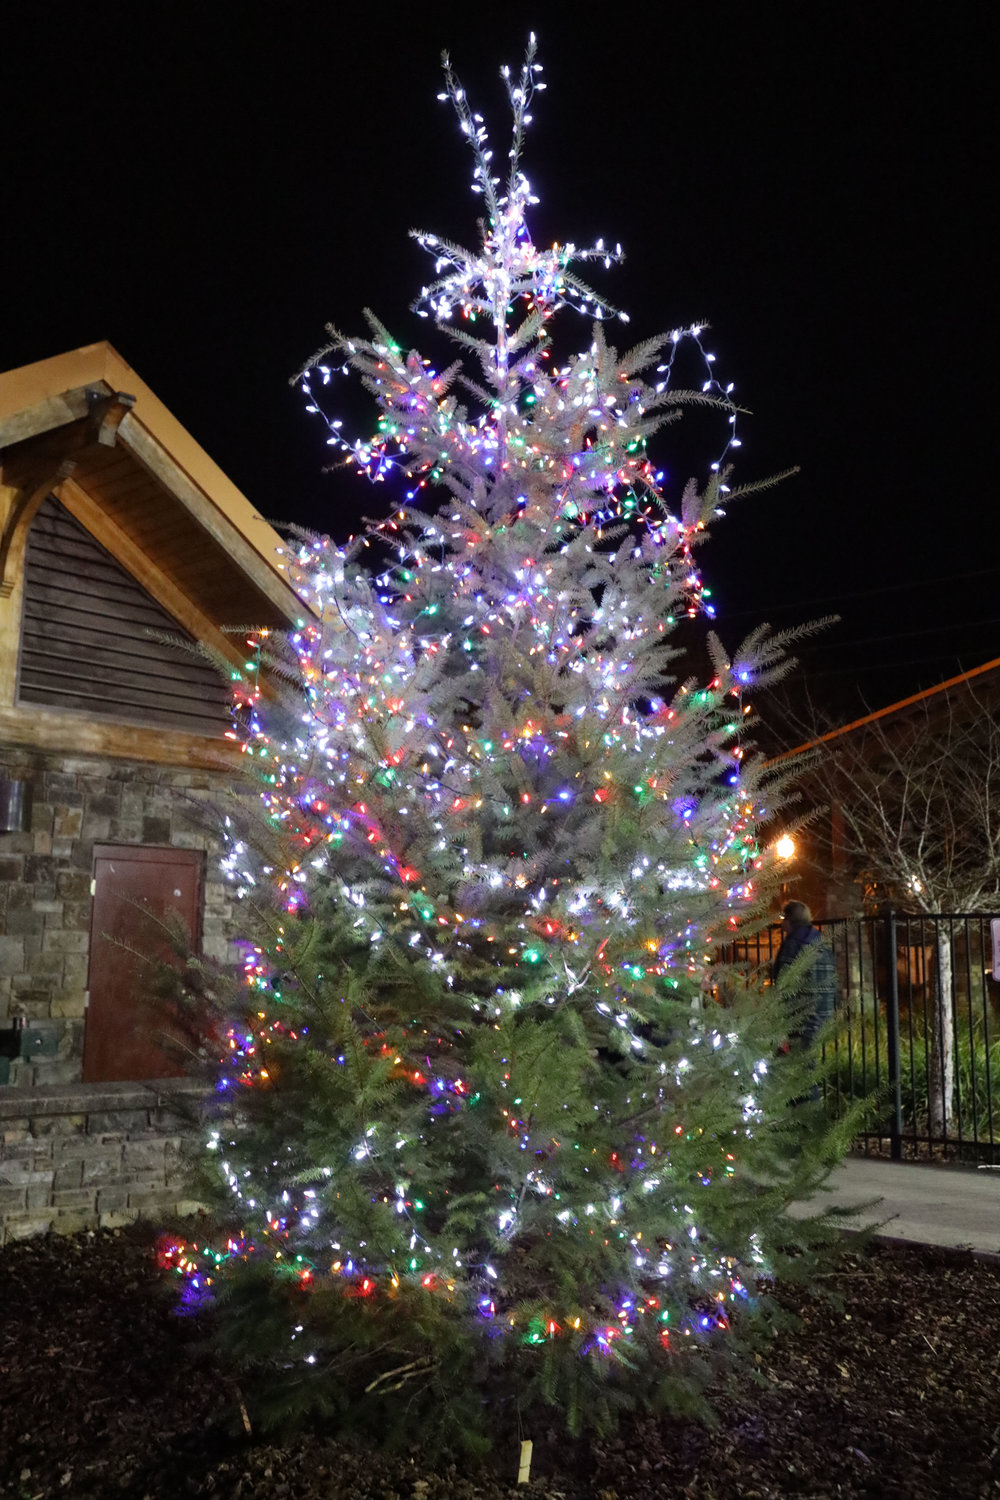 One of the trees decorated for the Battle Ground annual tree lighting is seen here.